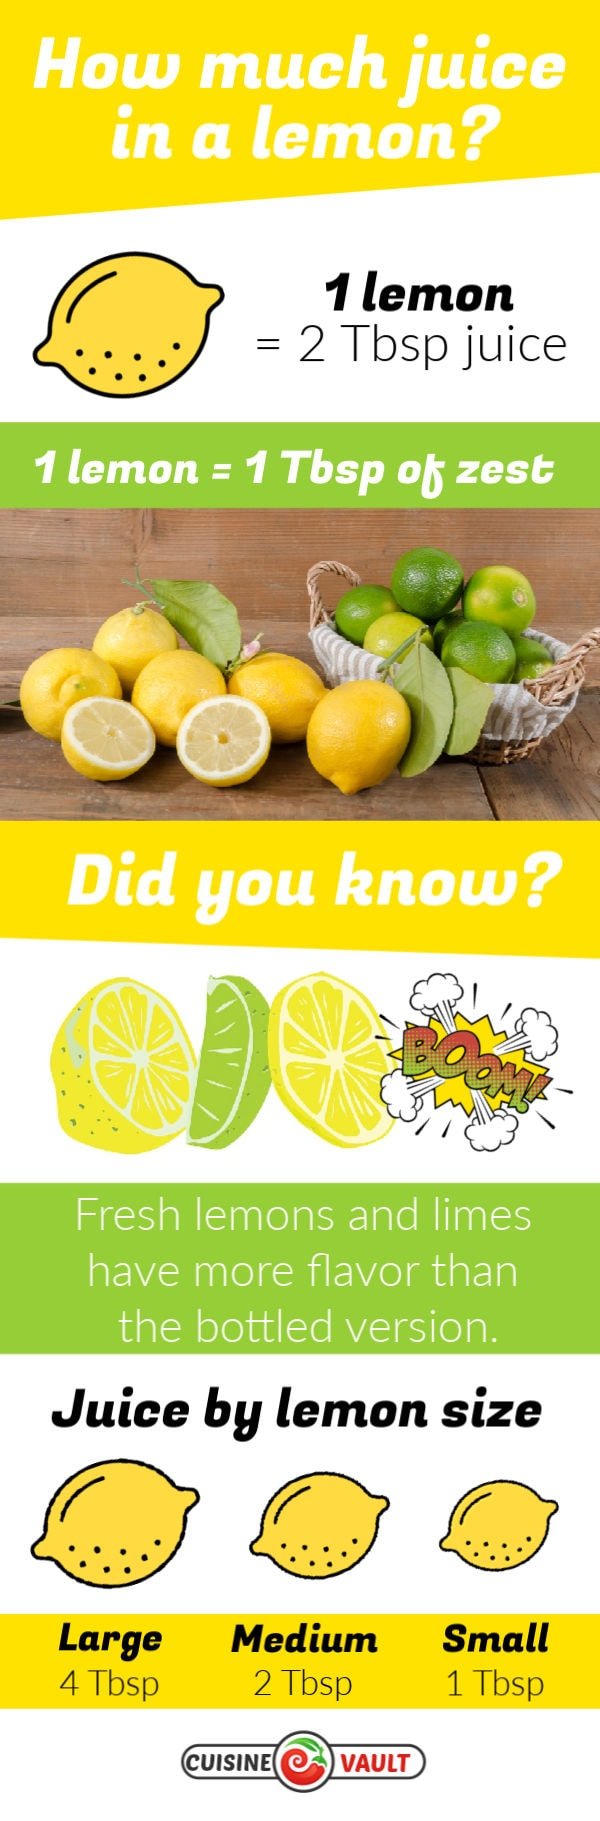 How much juice in a lemon